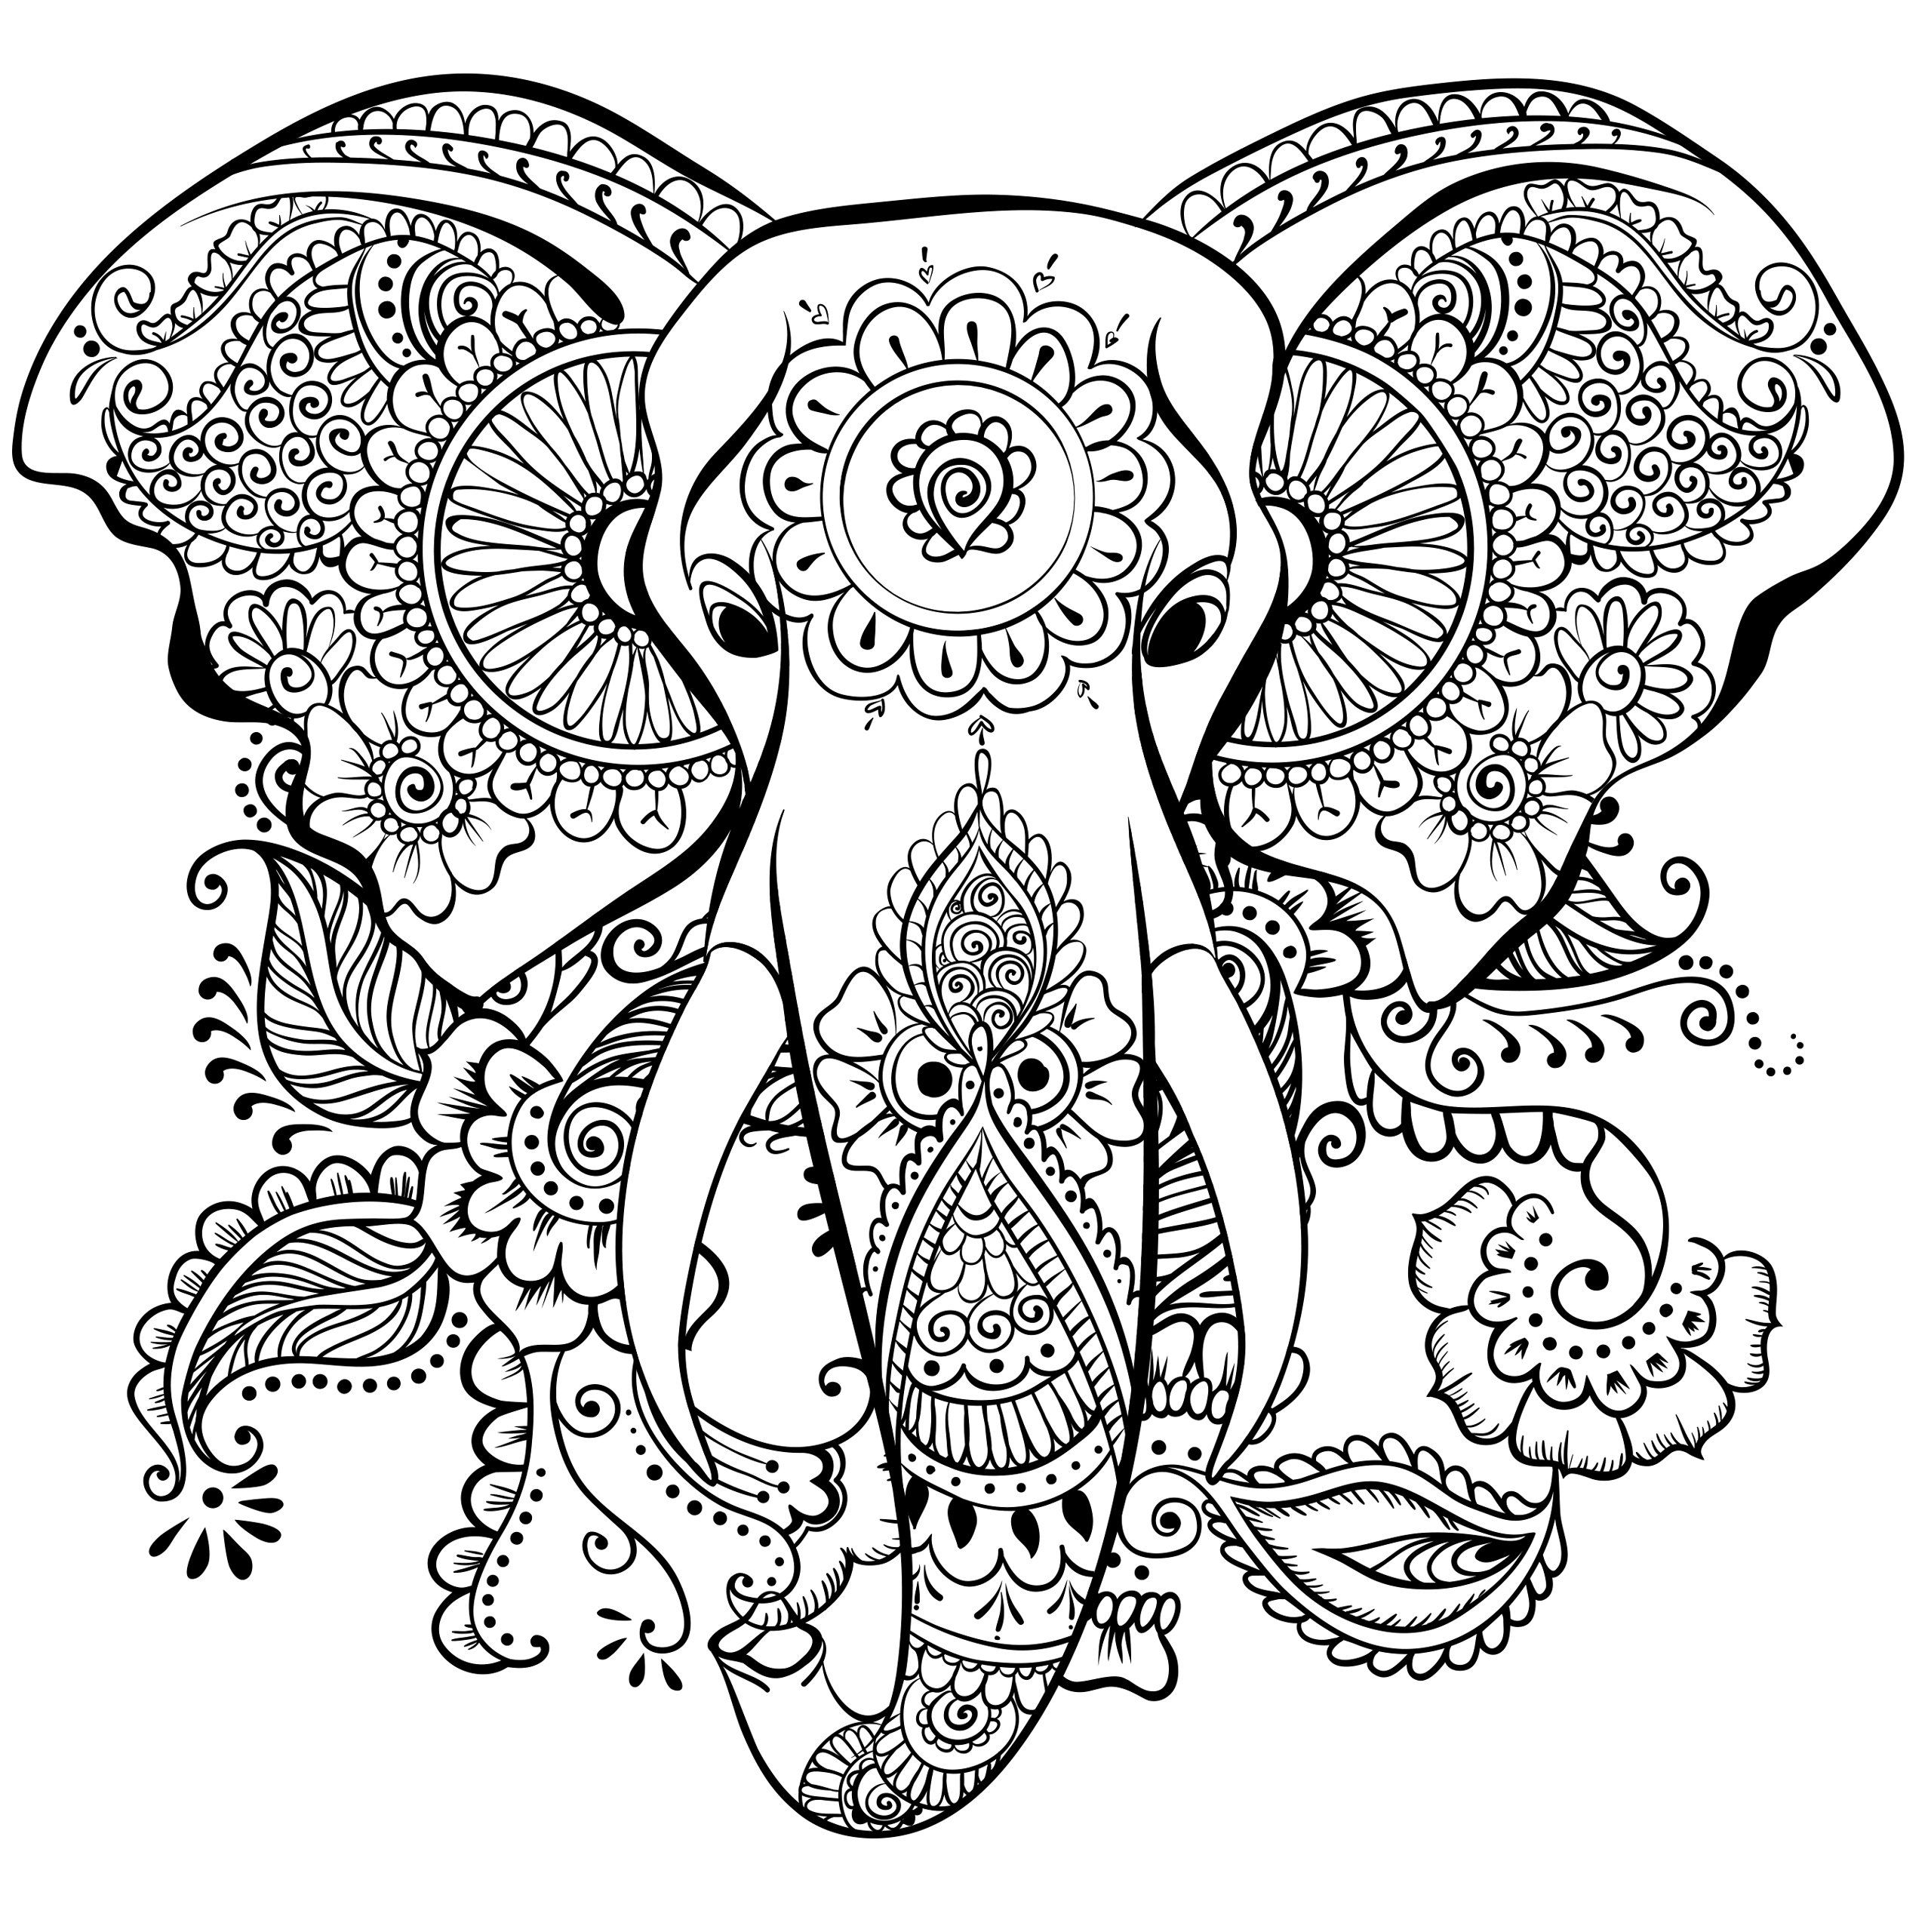 Stress Relief Coloring Pages For Adults at Free